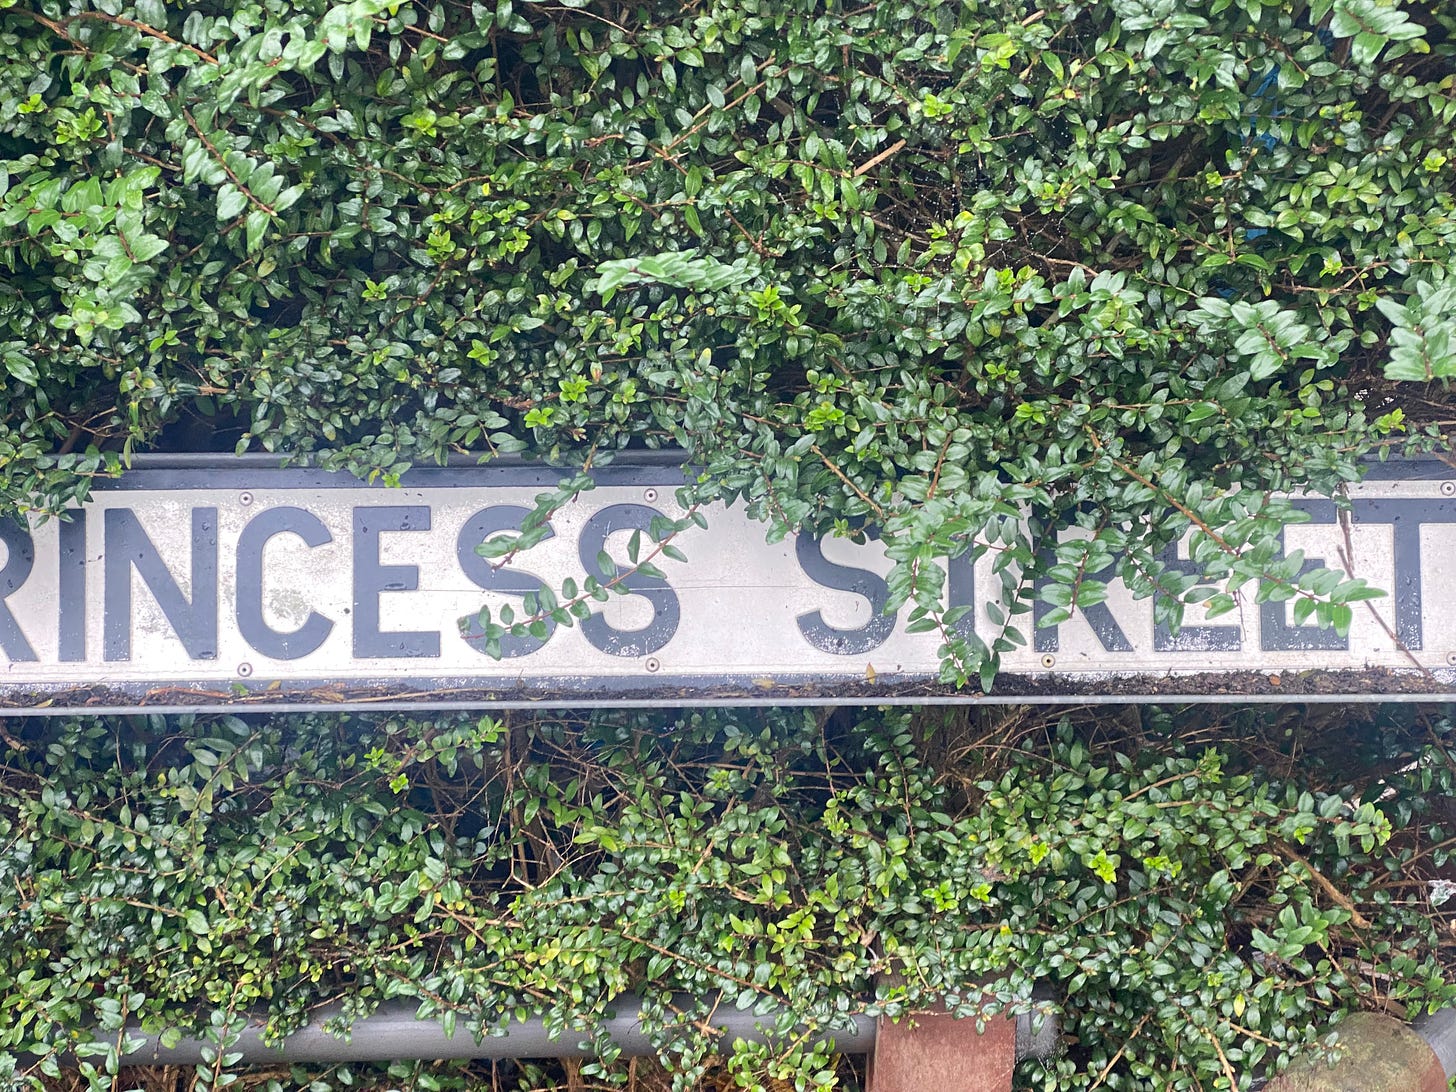 Partially obscured by foliage, a street sign saying 'Princess Street'